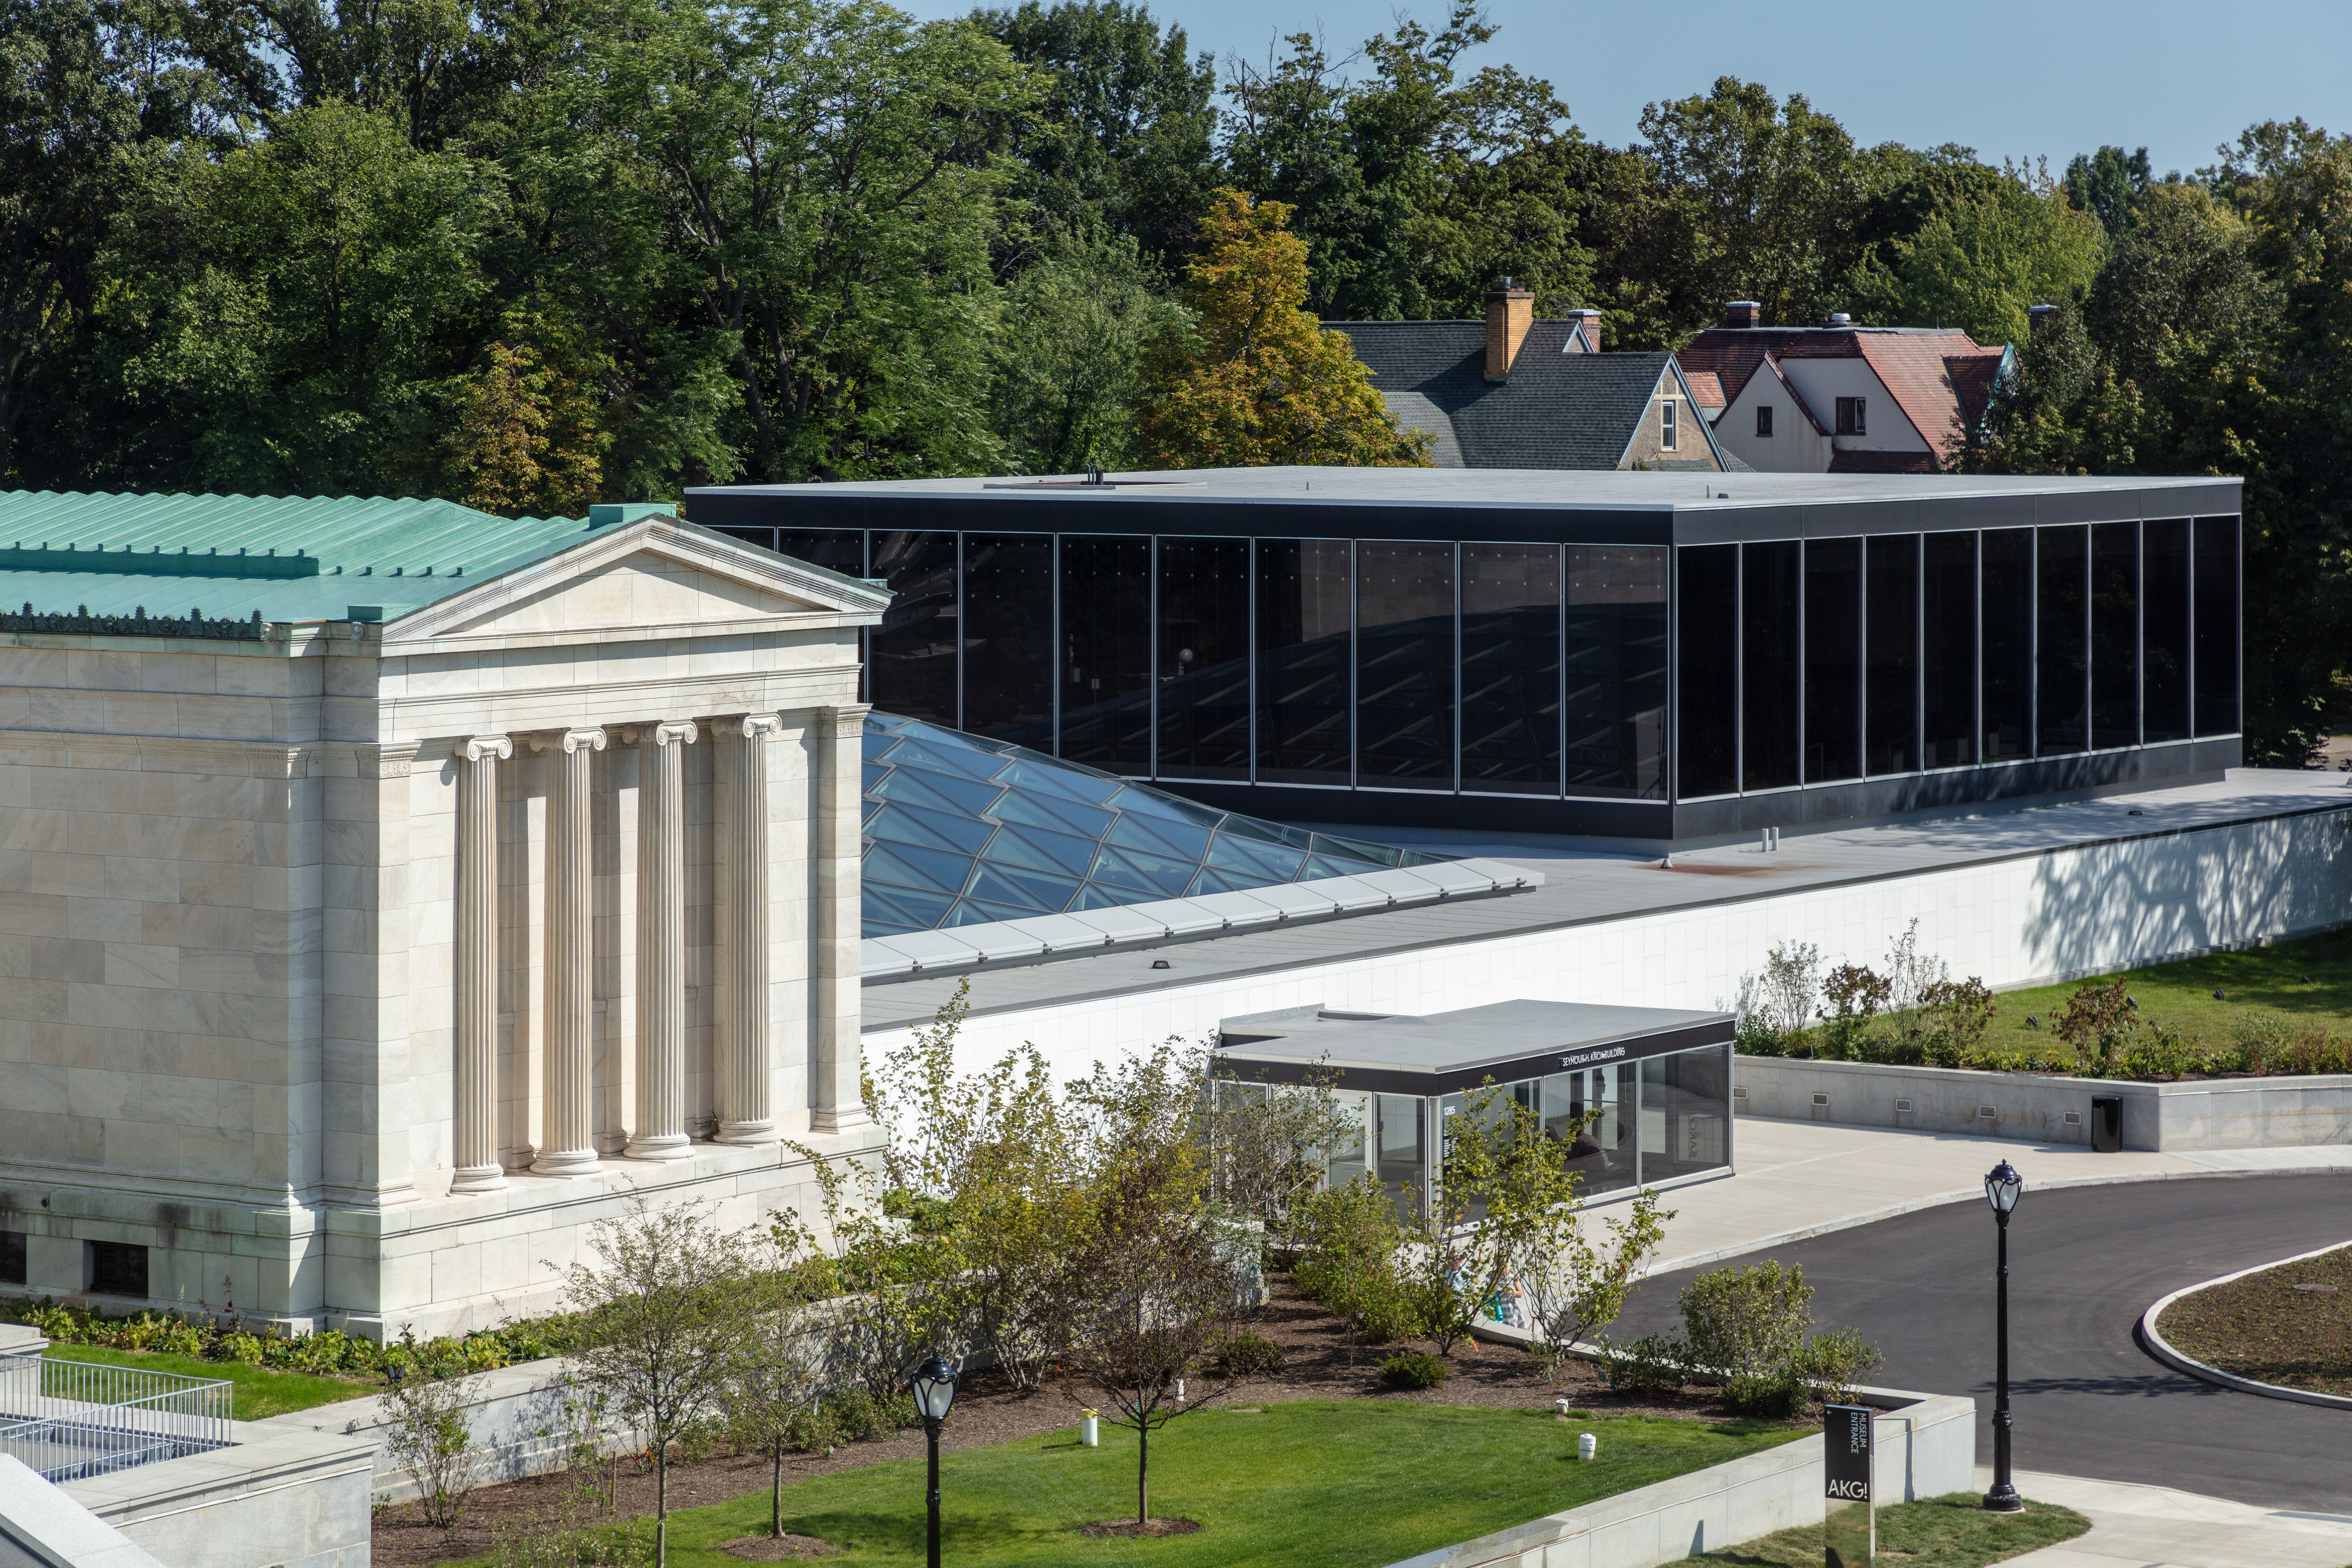 Aerial view of a museum building and a building with a glass canopy roof